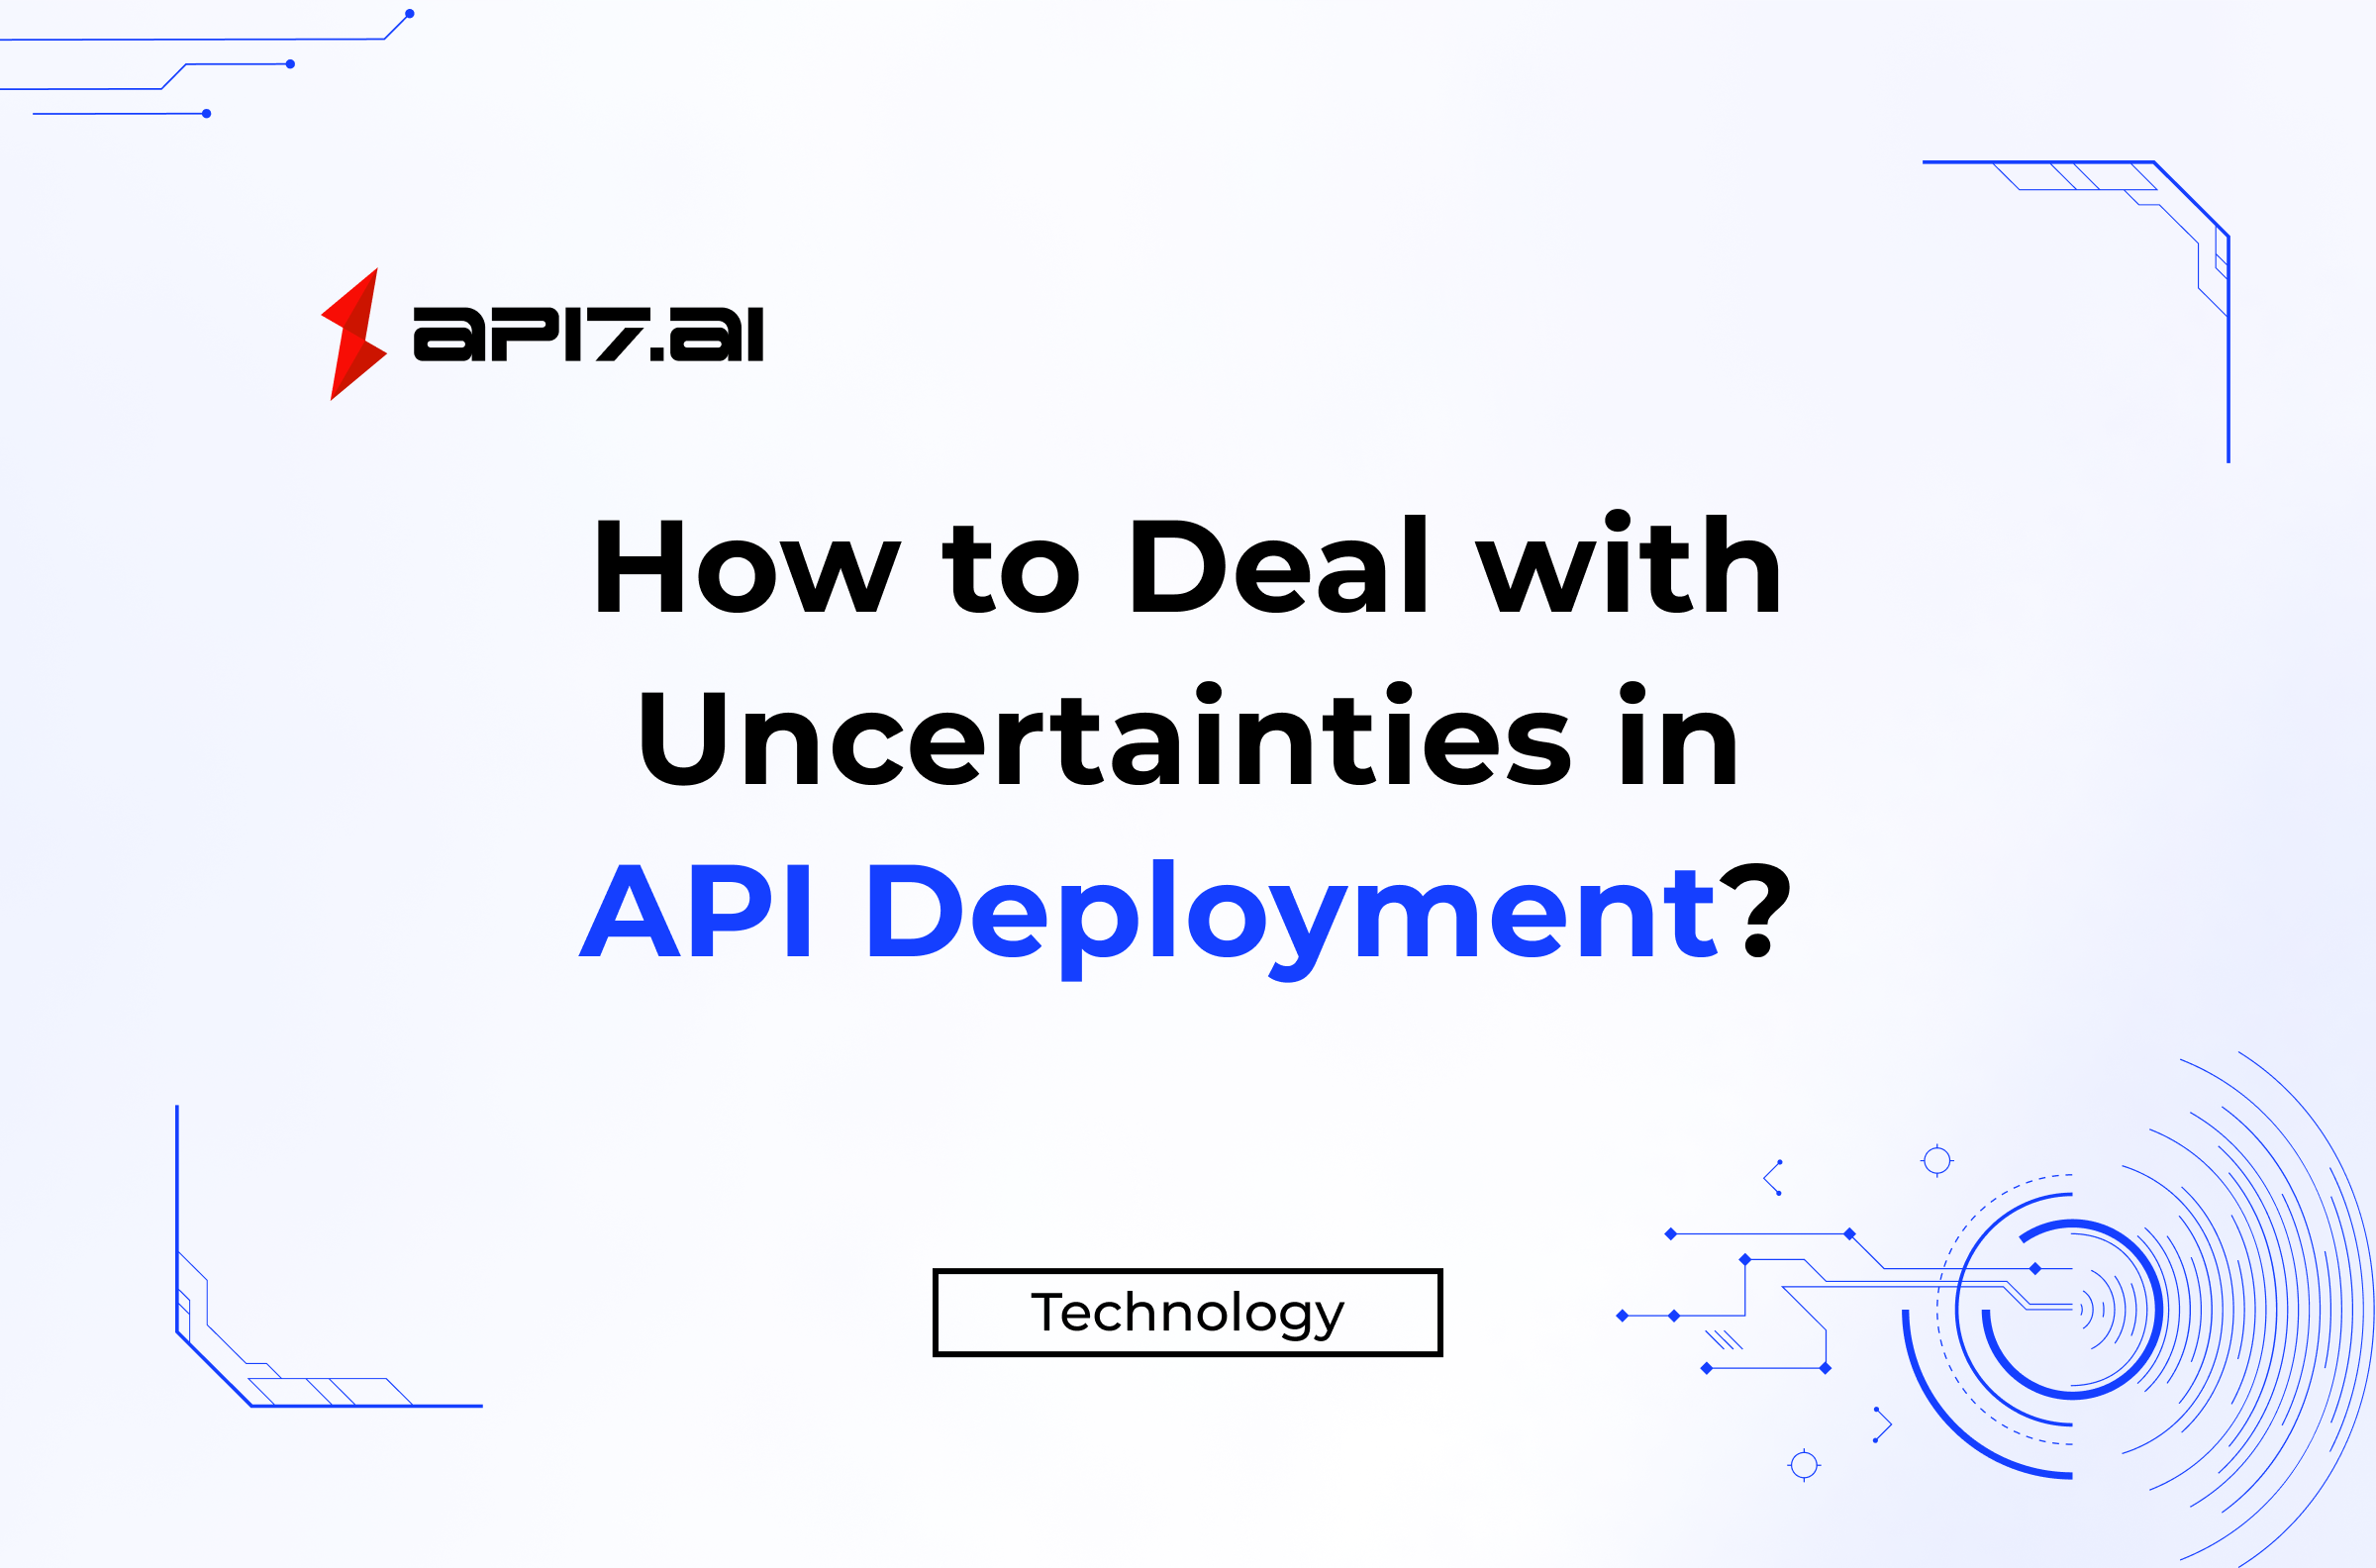 How to Deal with Uncertainties in API Deployment?